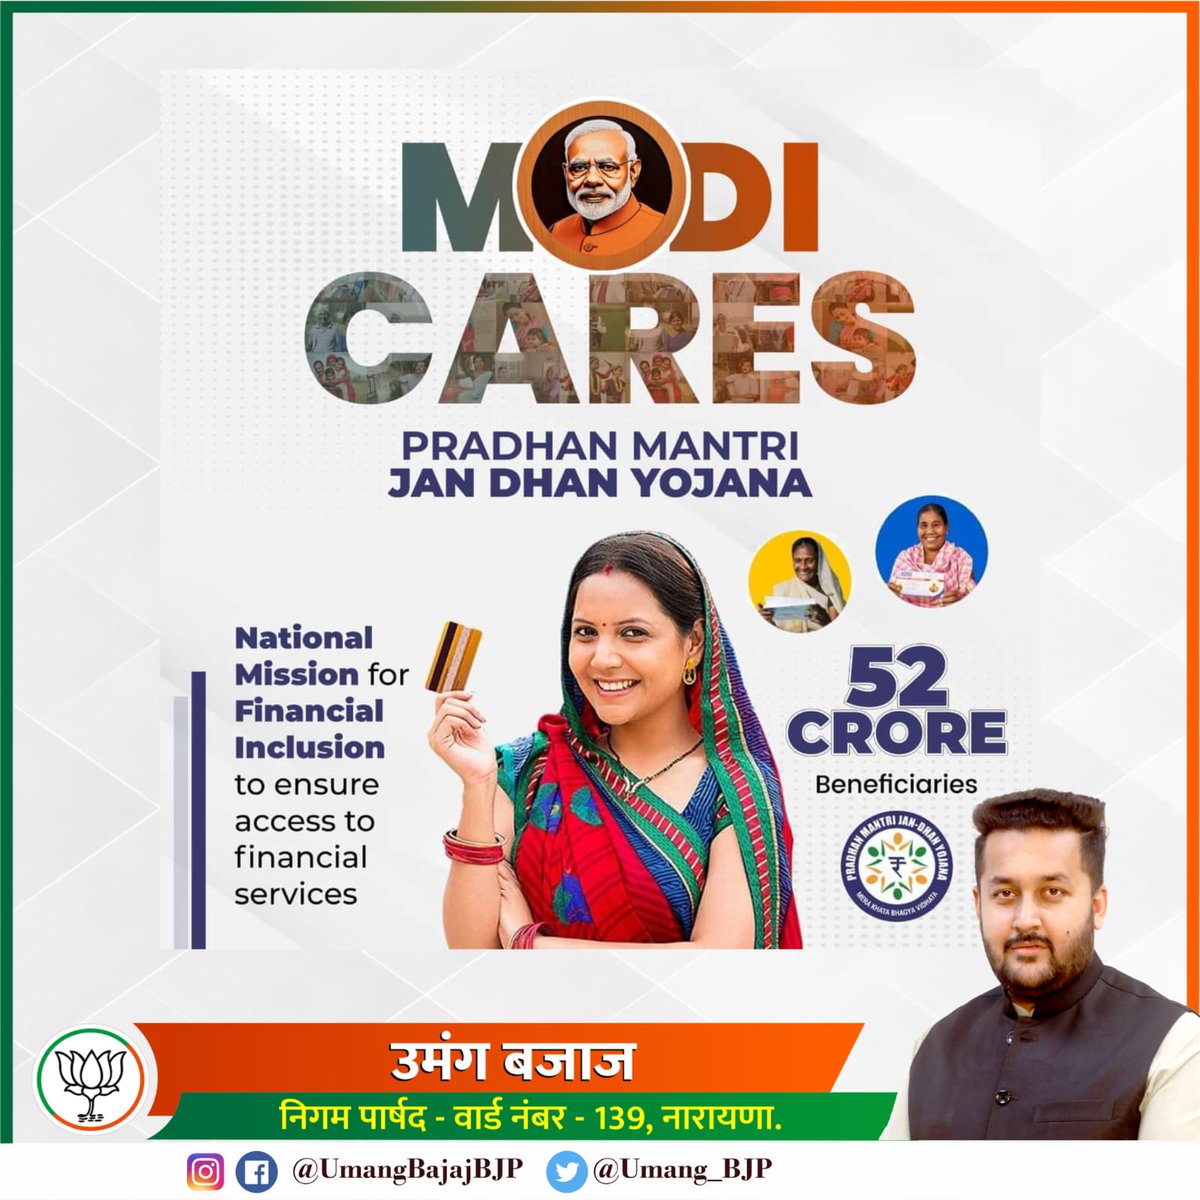 A leader who prioritizes the needs of the underprivileged.

A huge number of Indians didn't have bank accounts before 2014, depriving them of the benefits of the welfare schemes. PMJDY proved to be a game-changer in financial inclusion.